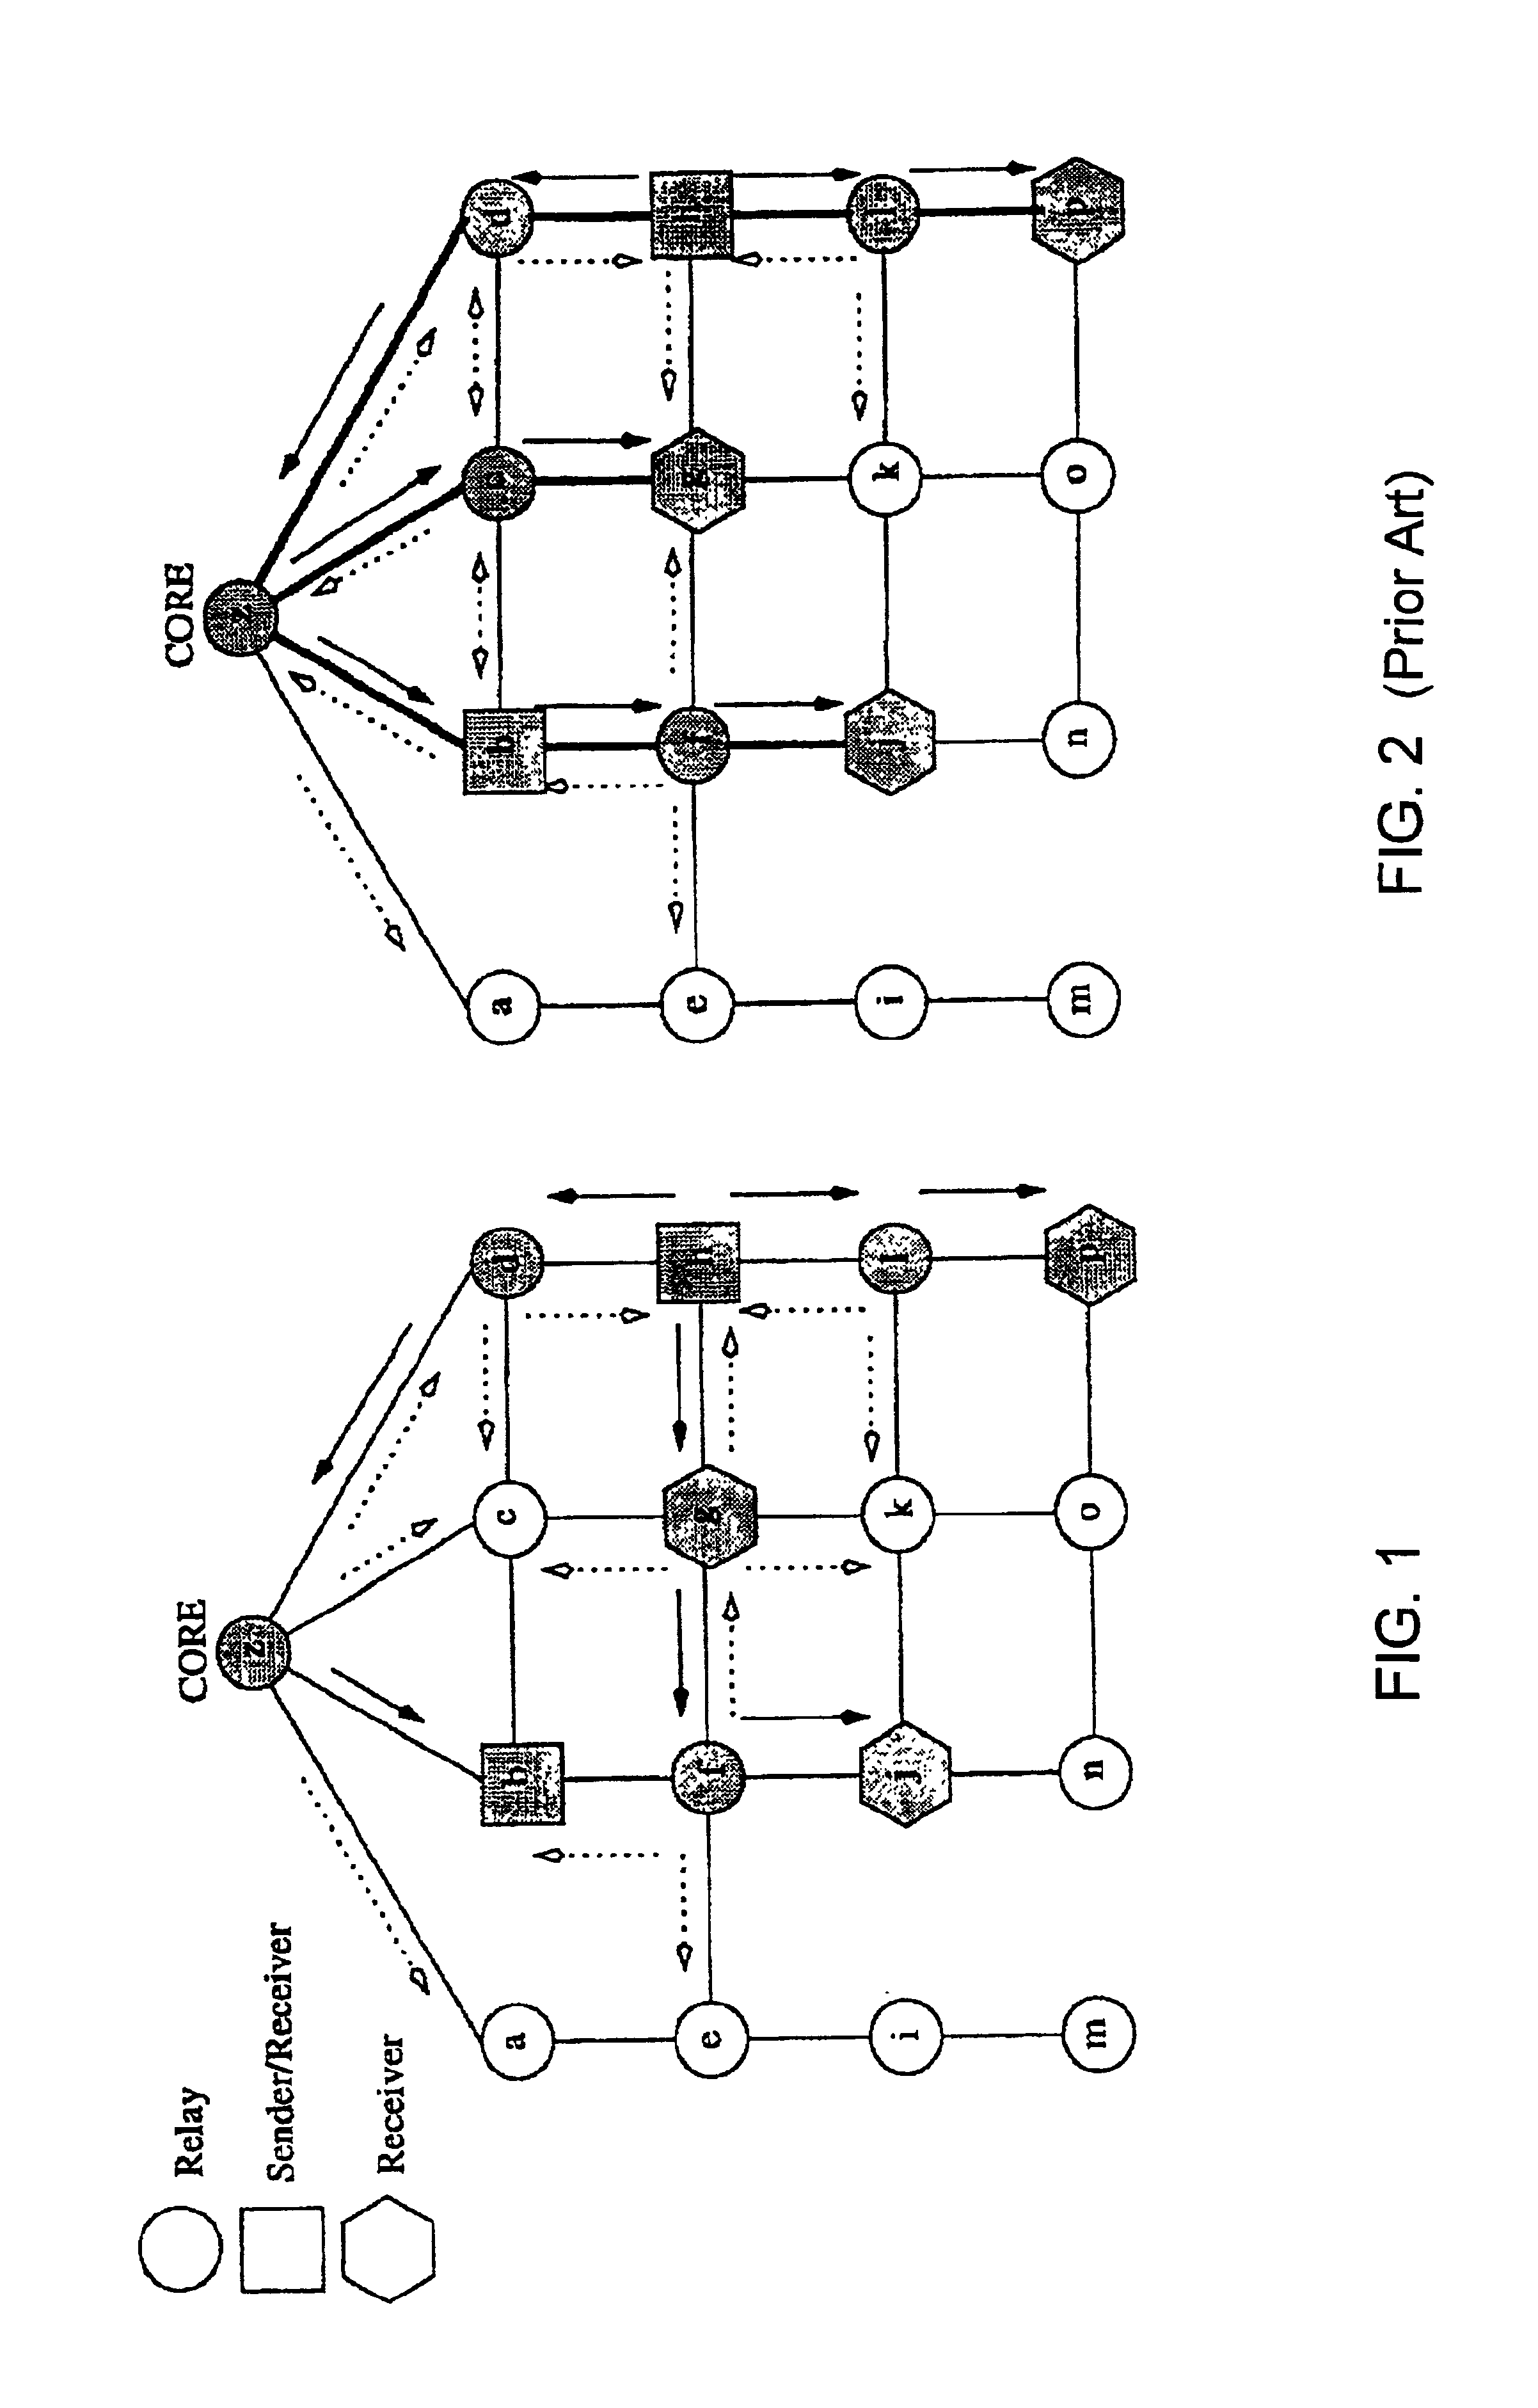 Core assisted mesh protocol for multicast routing in ad-hoc Networks